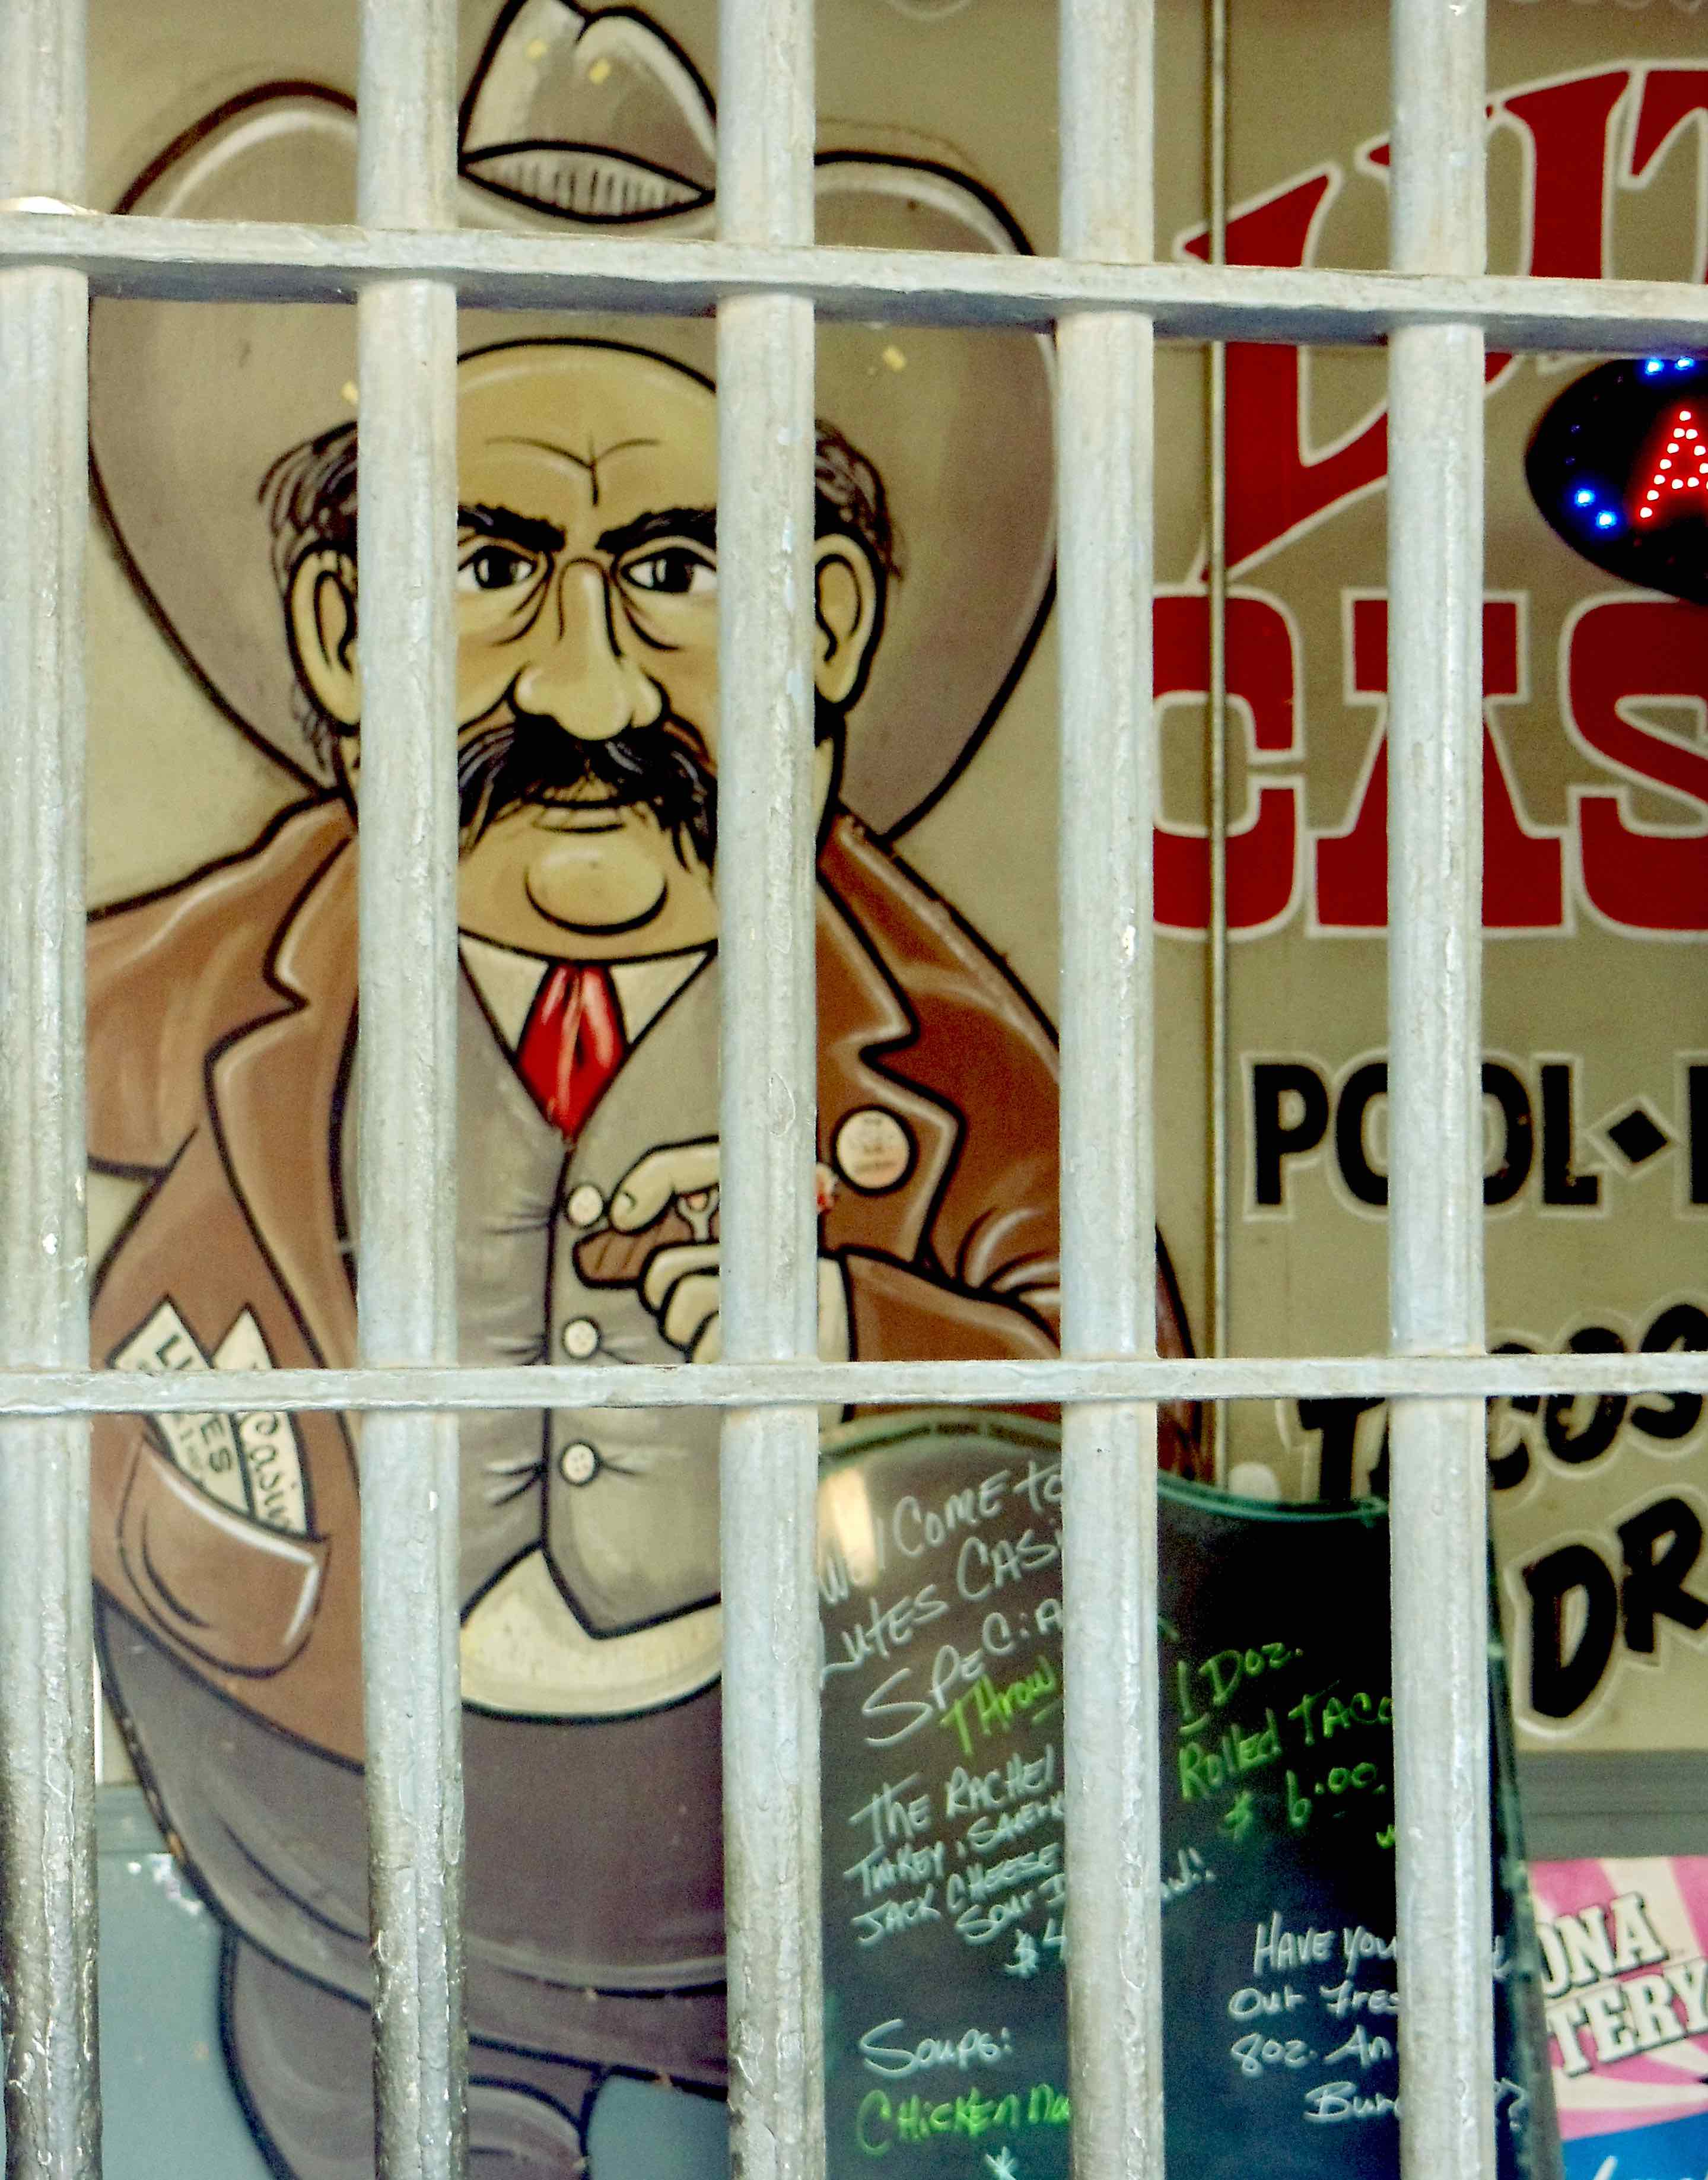 A classic art of a man with a big black mustache and cowboy hat is shown behind bars. The art is typically associated with Lutes Casino